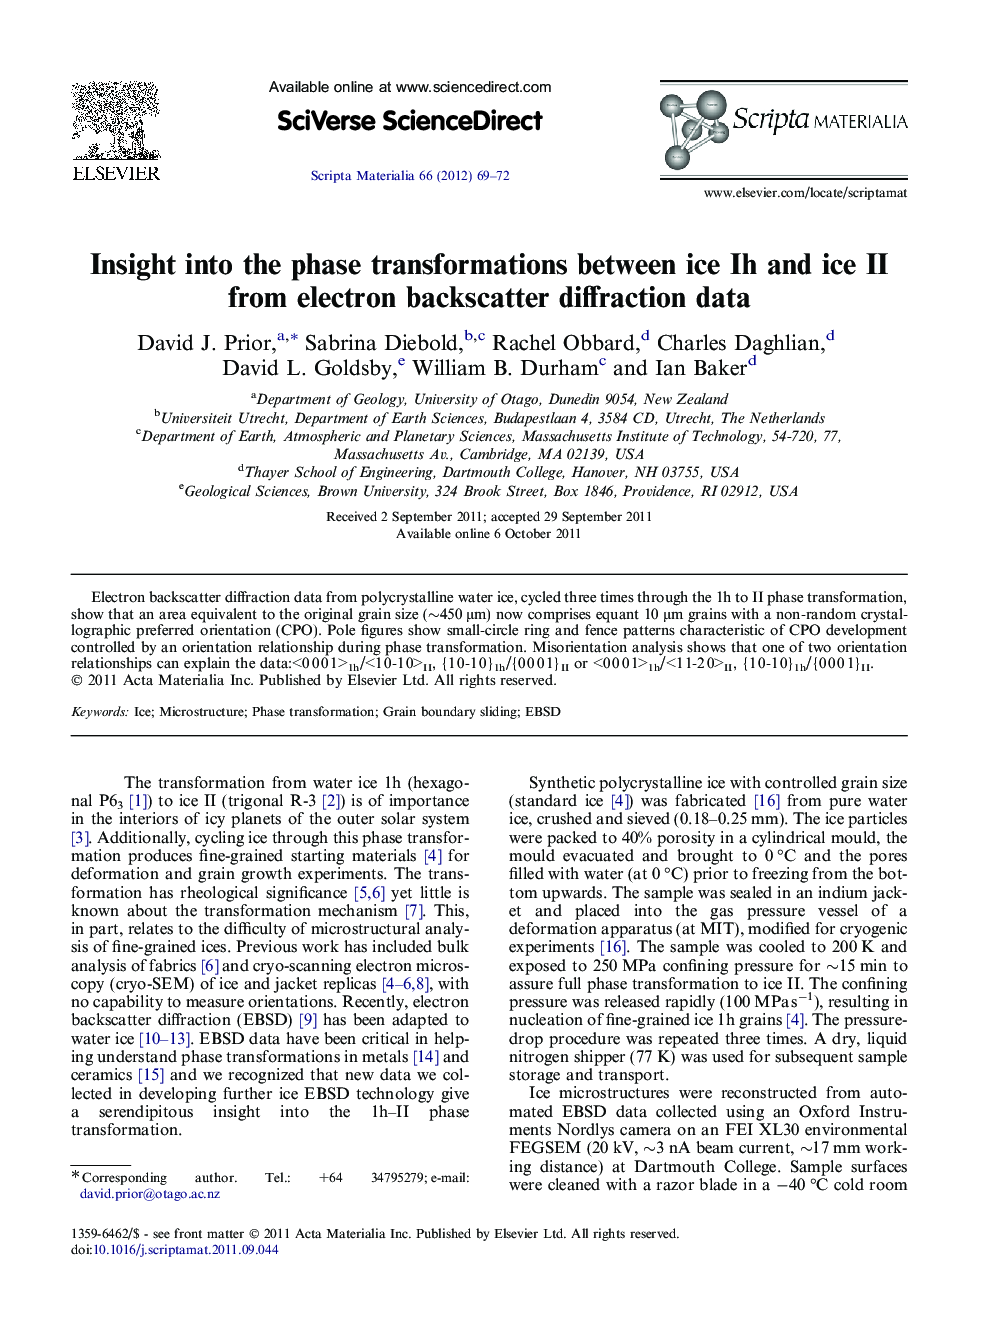 Insight into the phase transformations between ice Ih and ice II from electron backscatter diffraction data